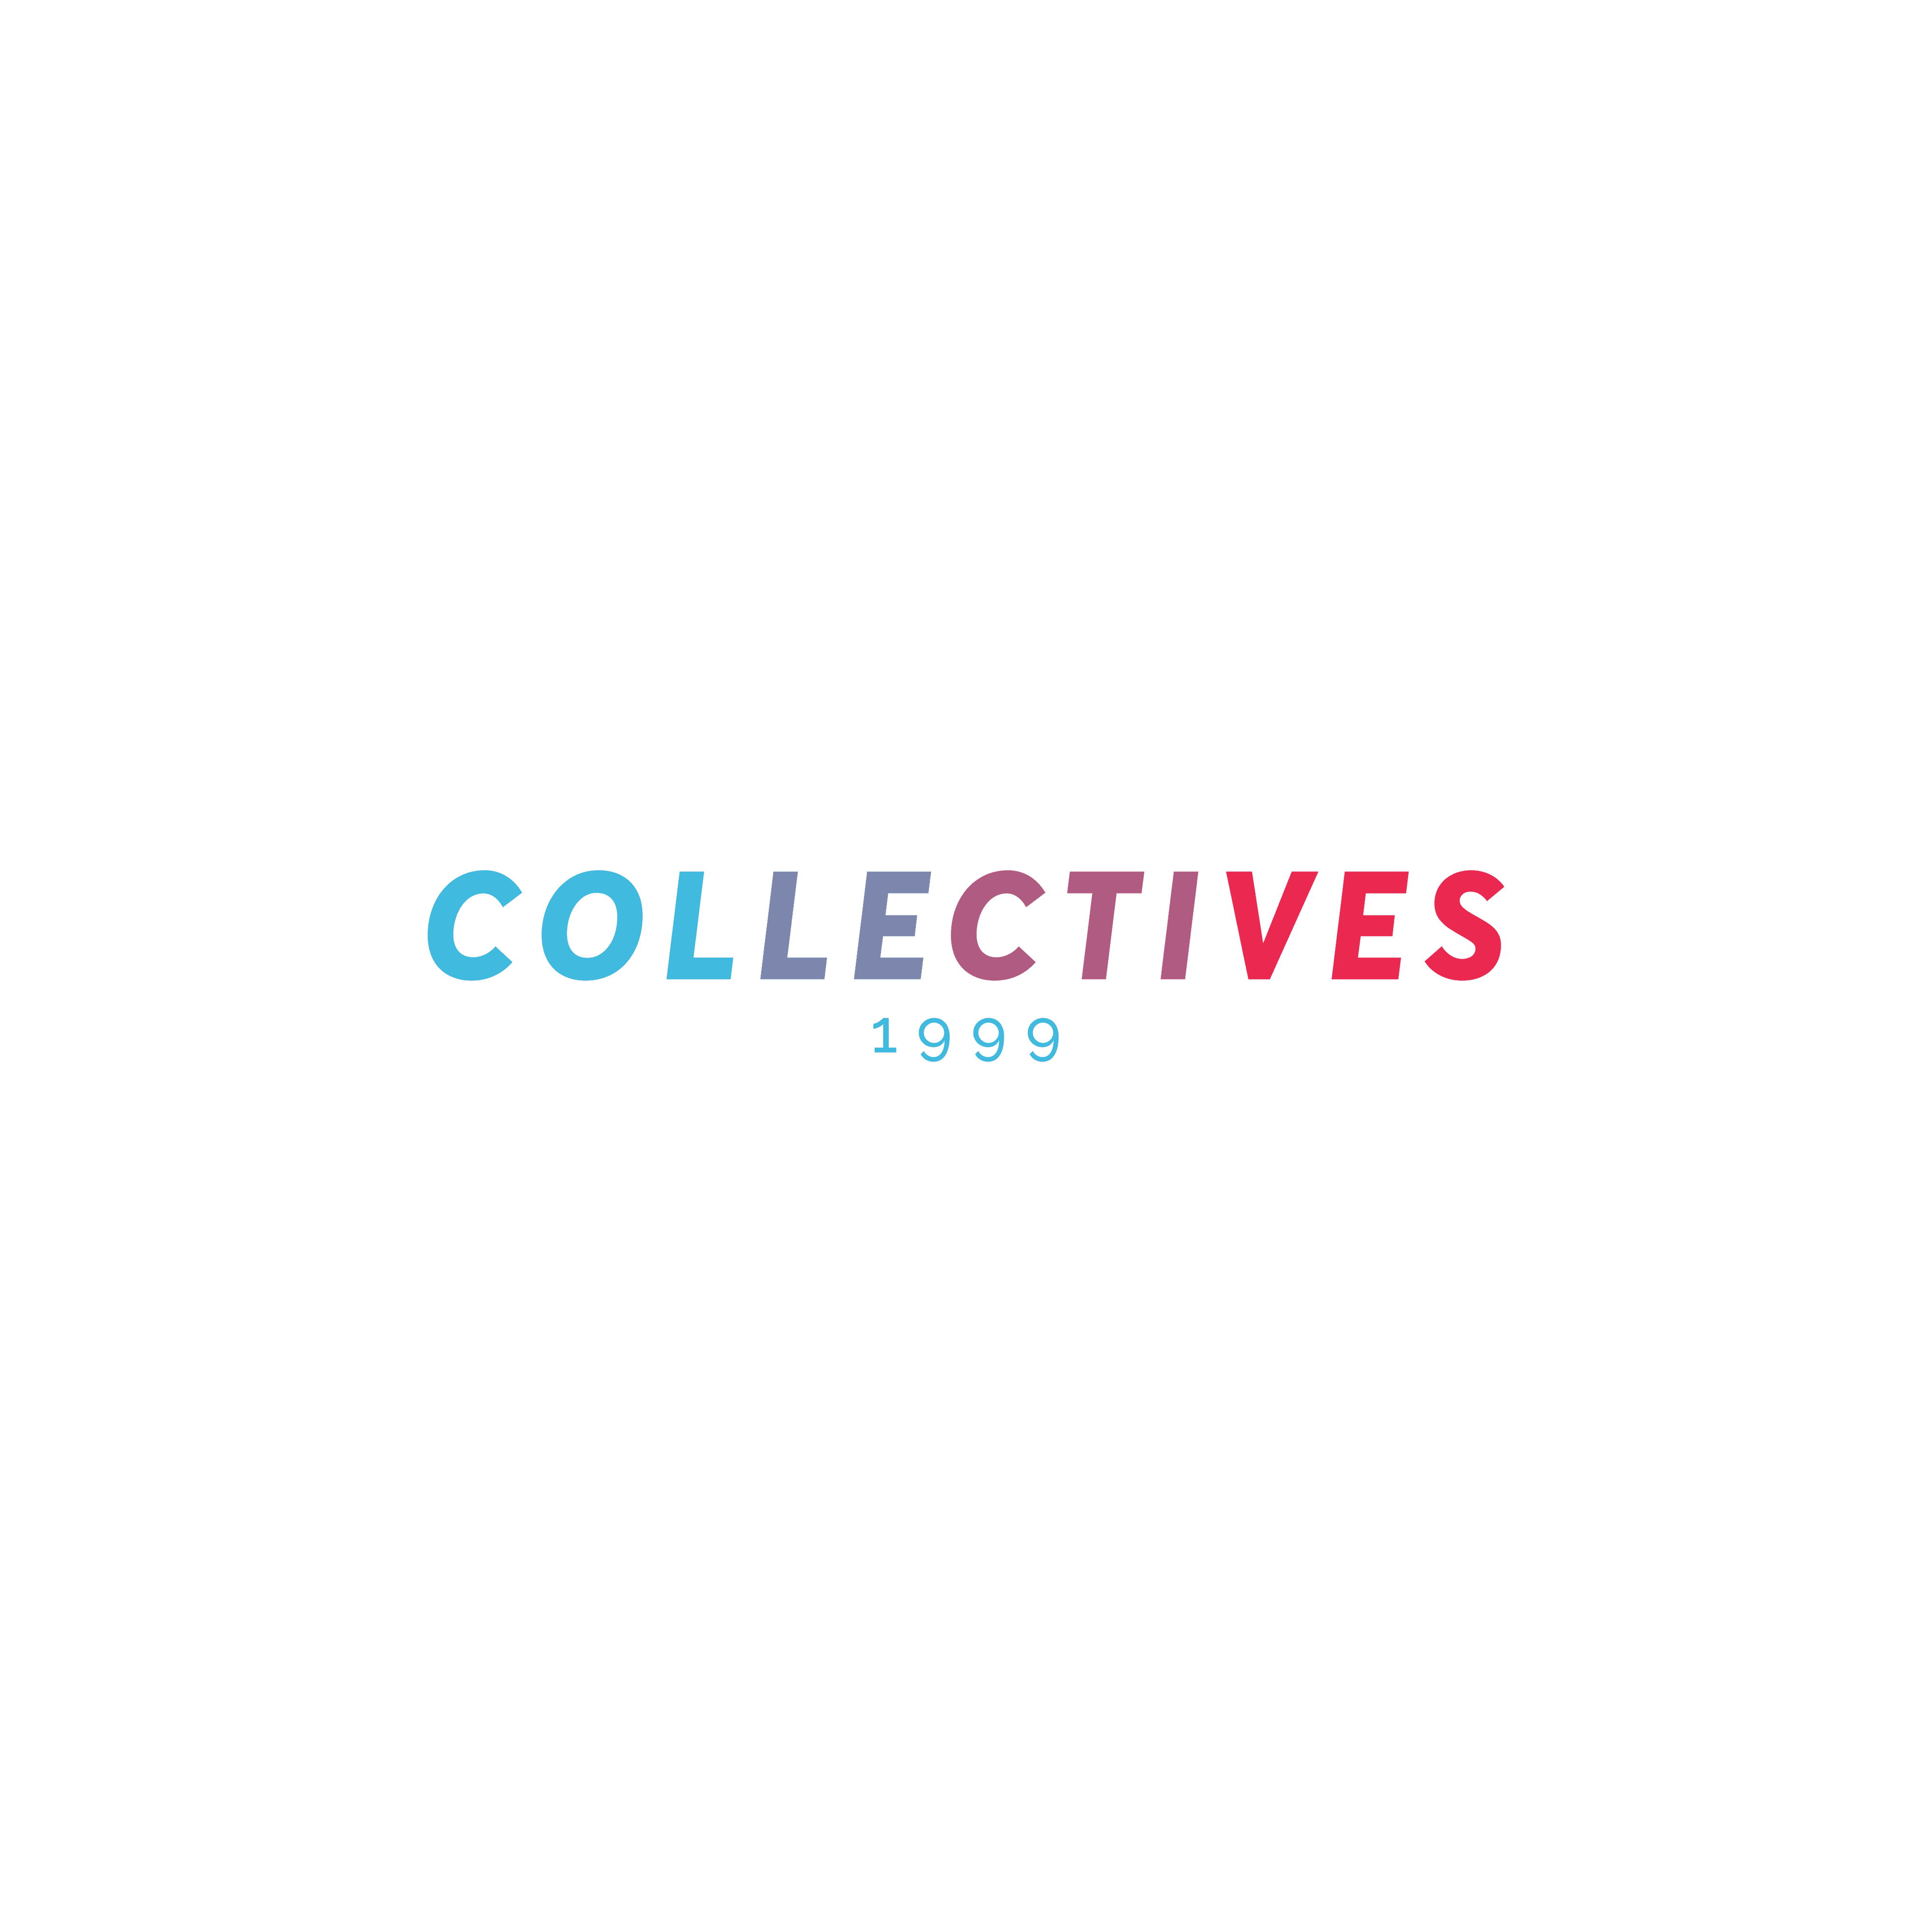 Collectives1999